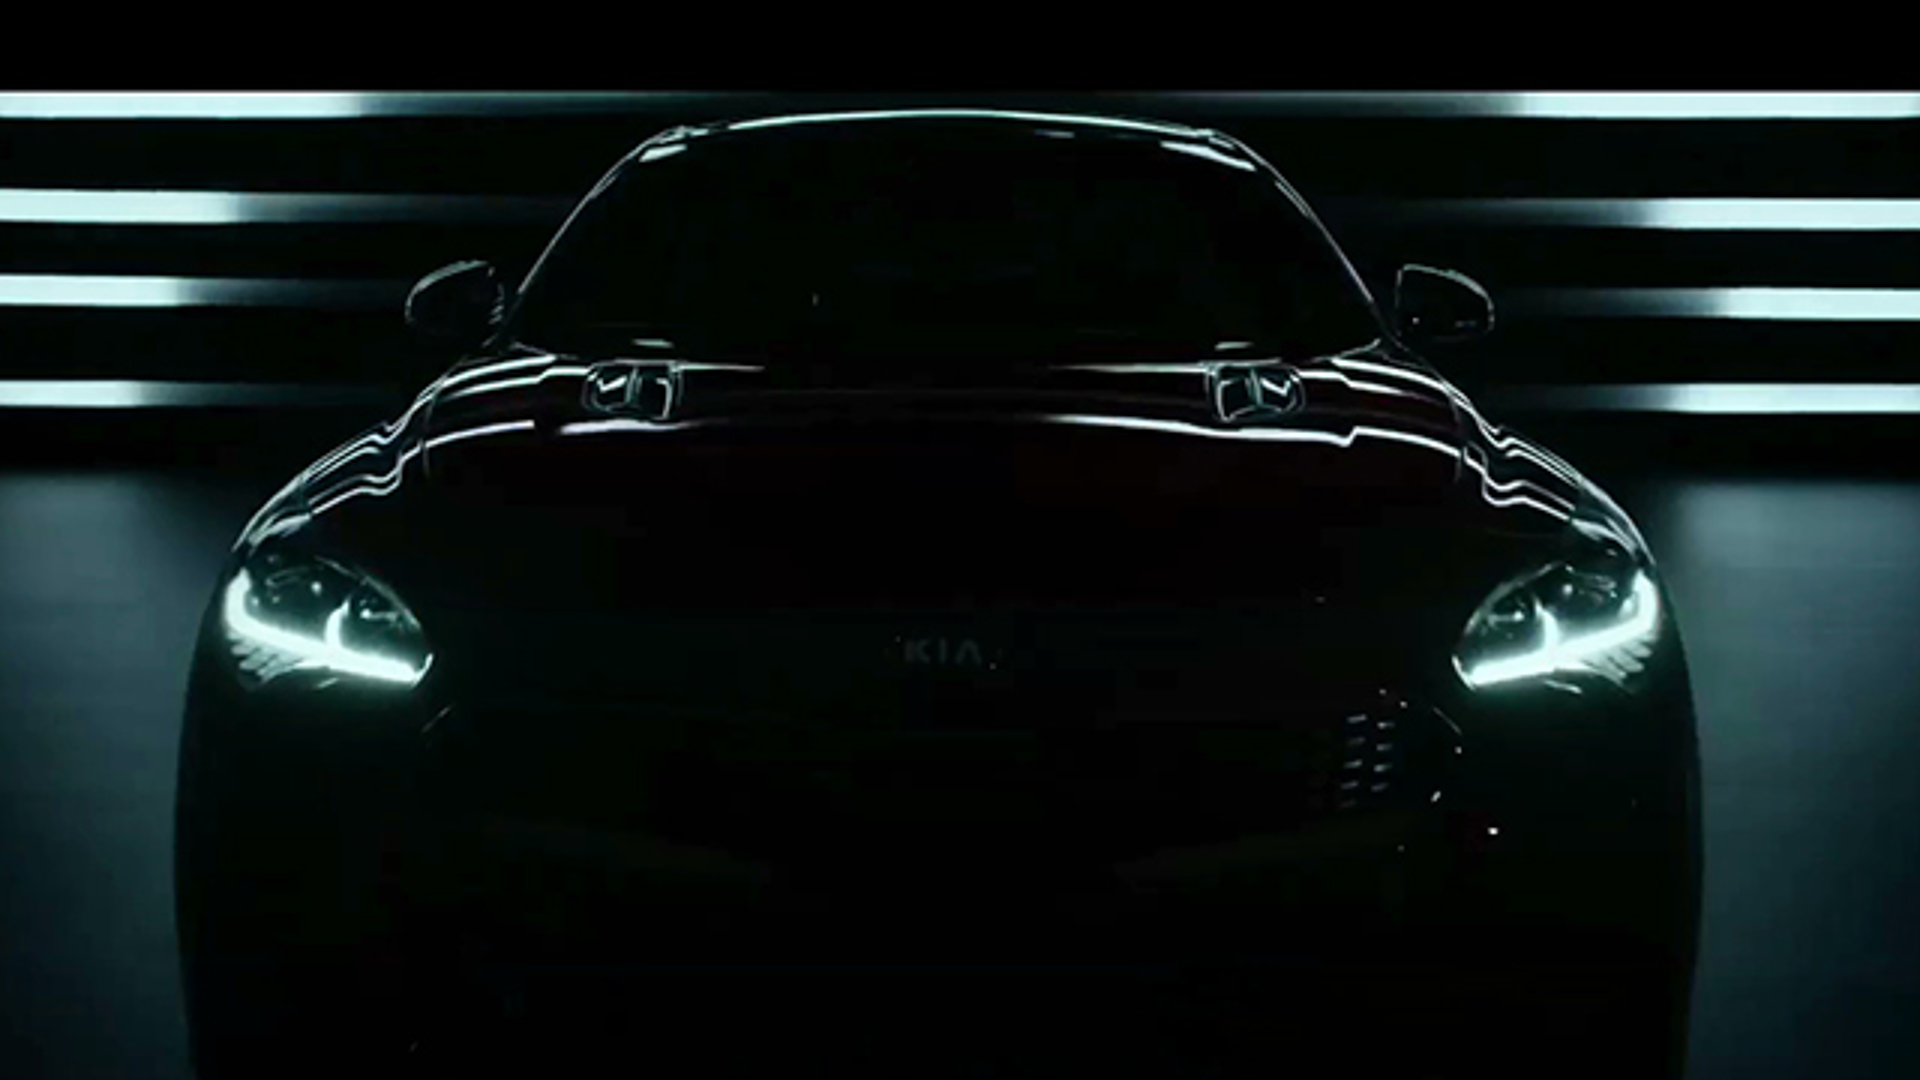 DIRECTED BY: Kia Stinger 